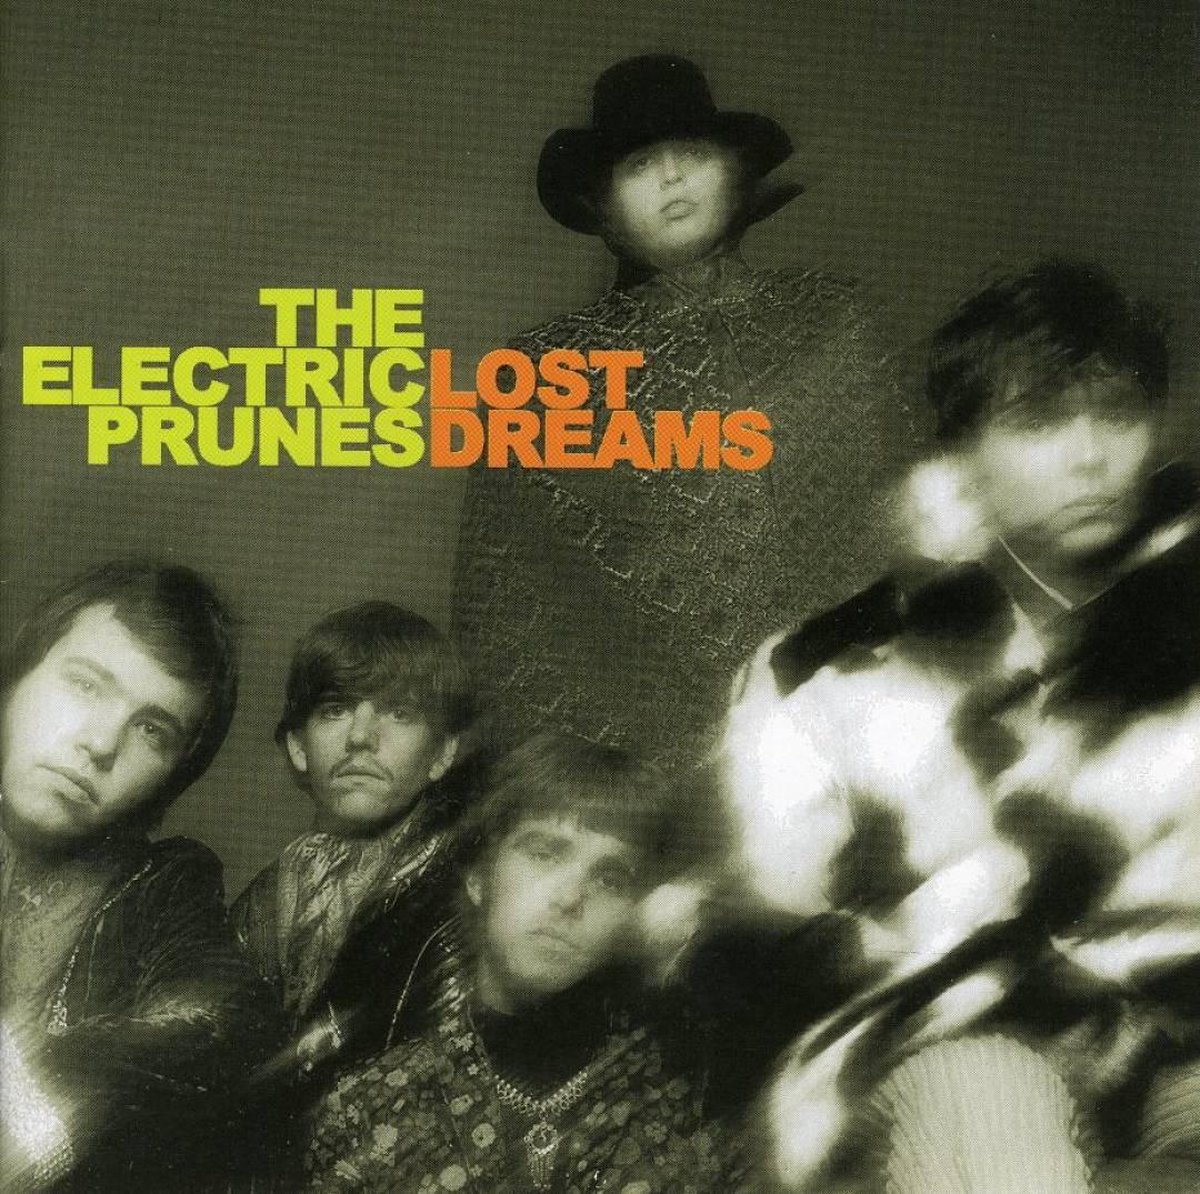 Lost Dreams - The Electric Prunes